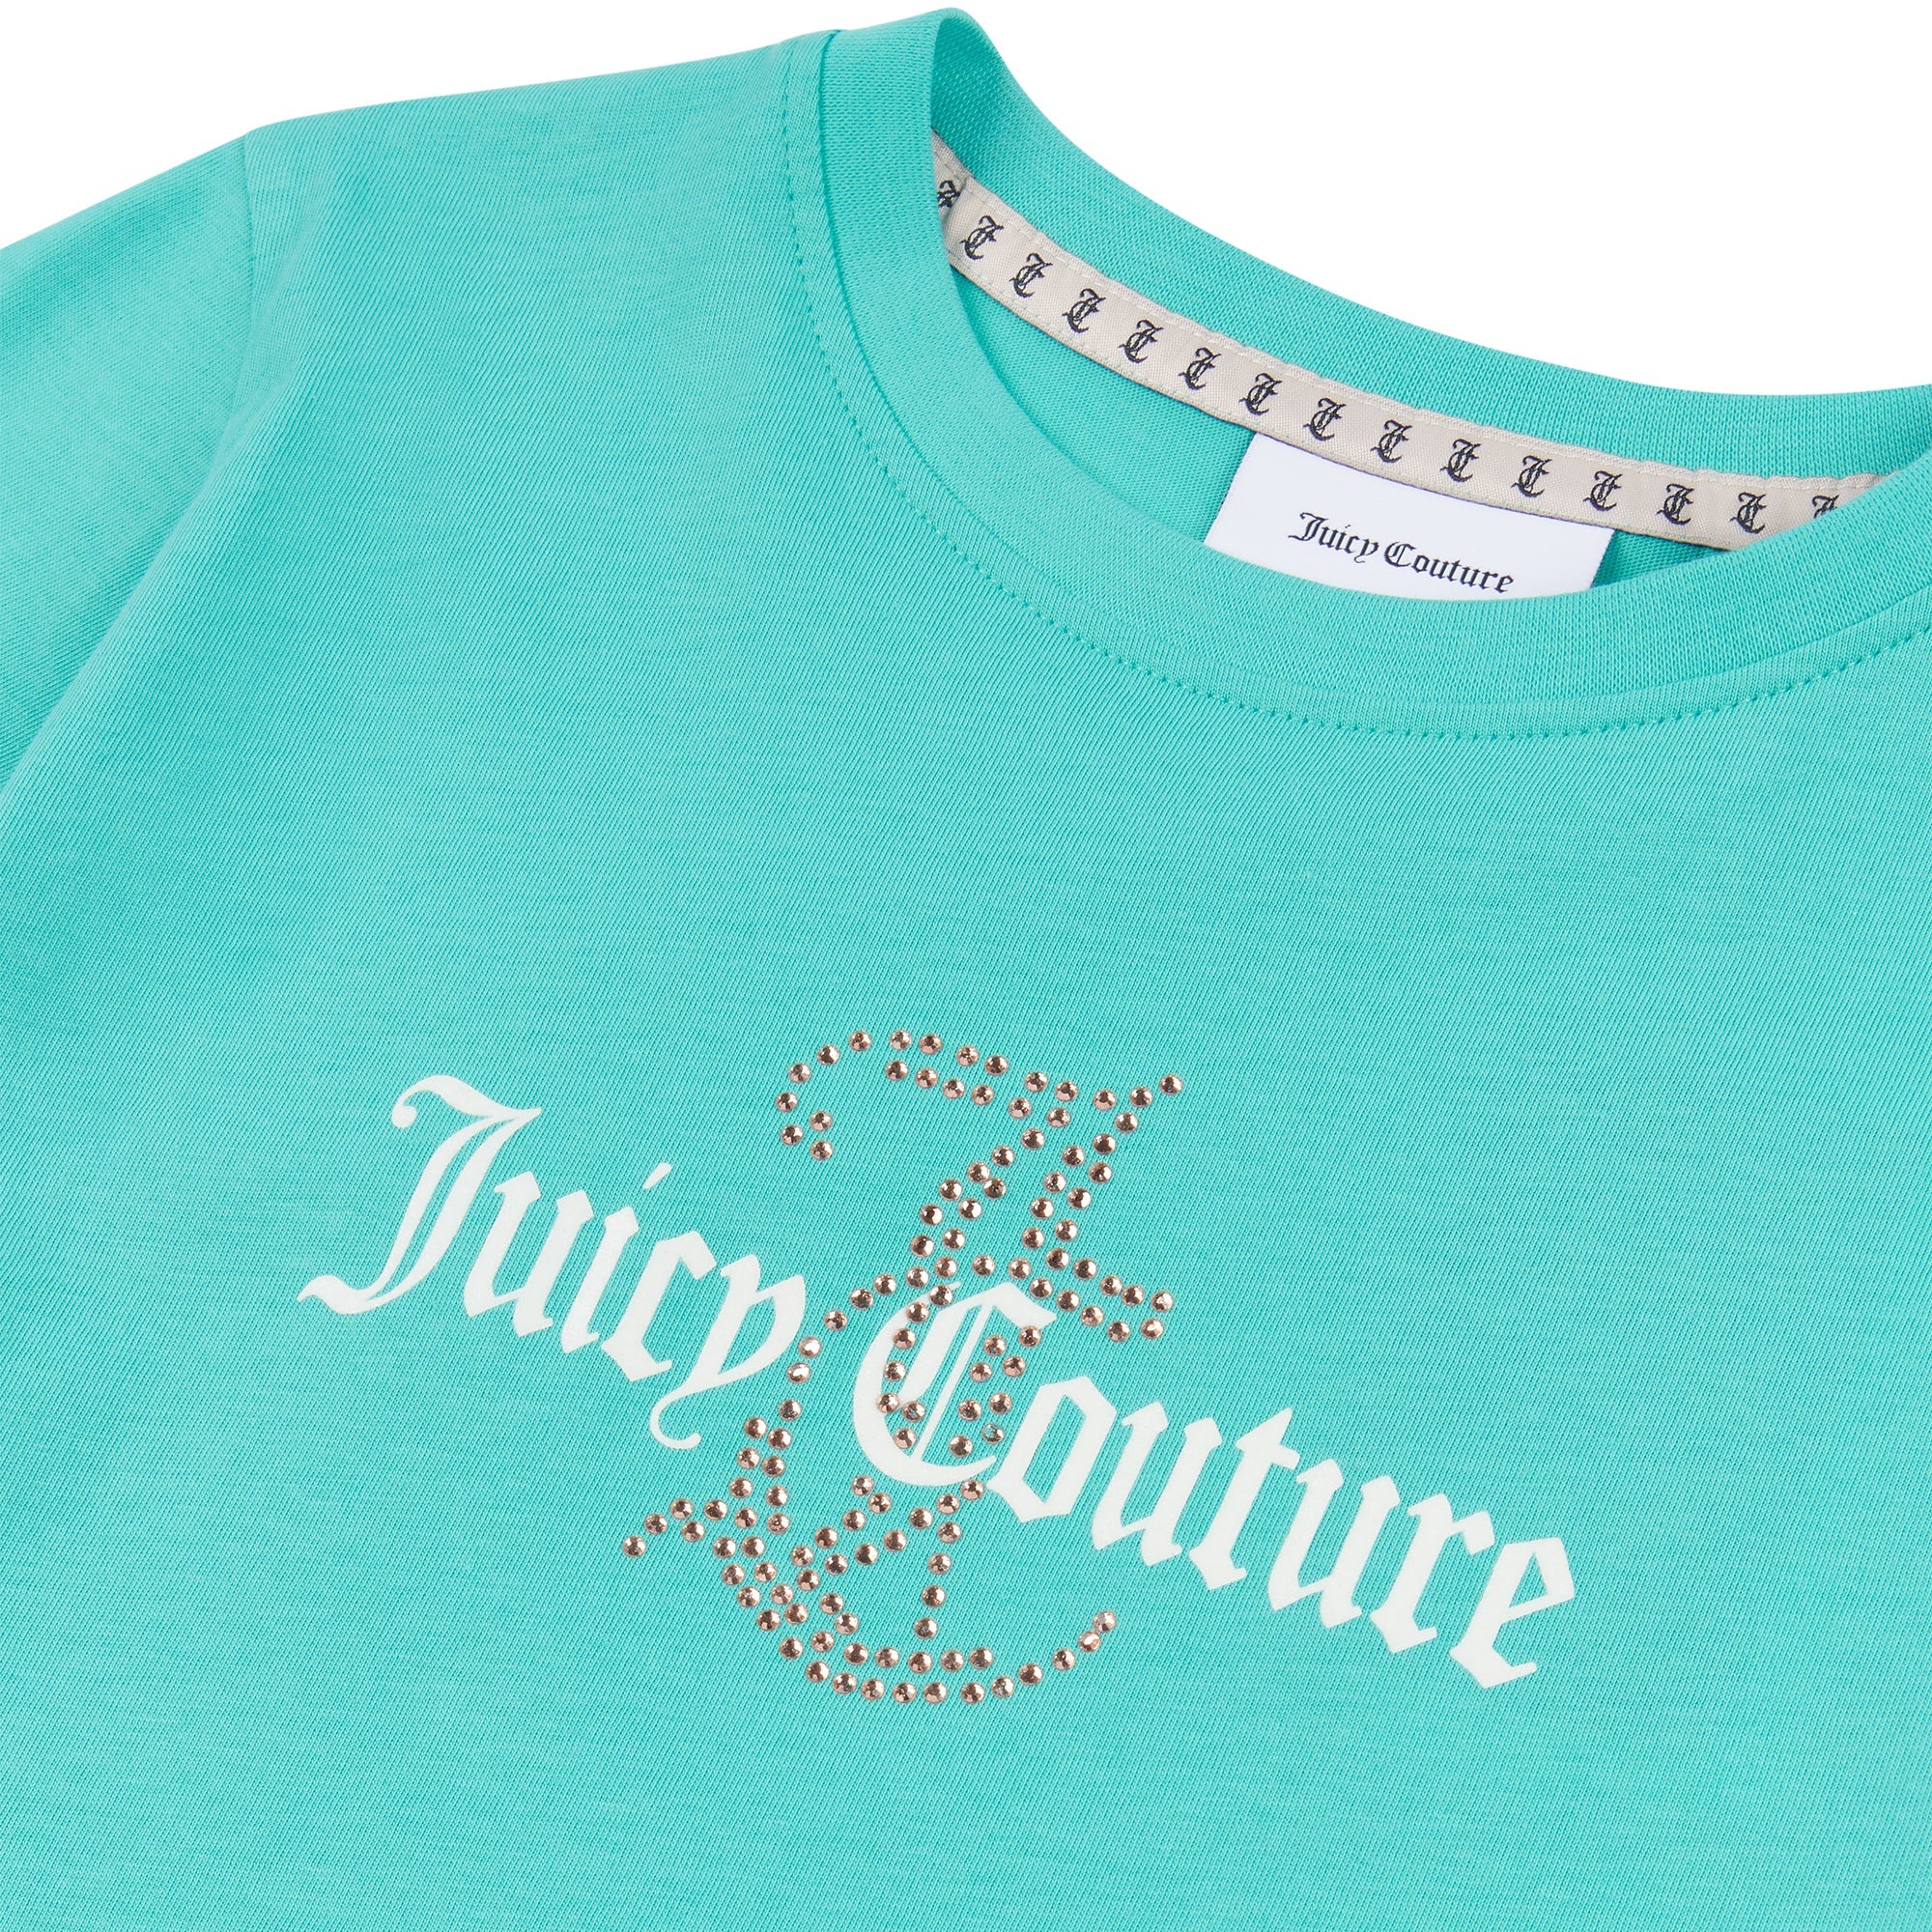 Juicy Couture Diamante T-Shirt JuniorAlive & Dirty 